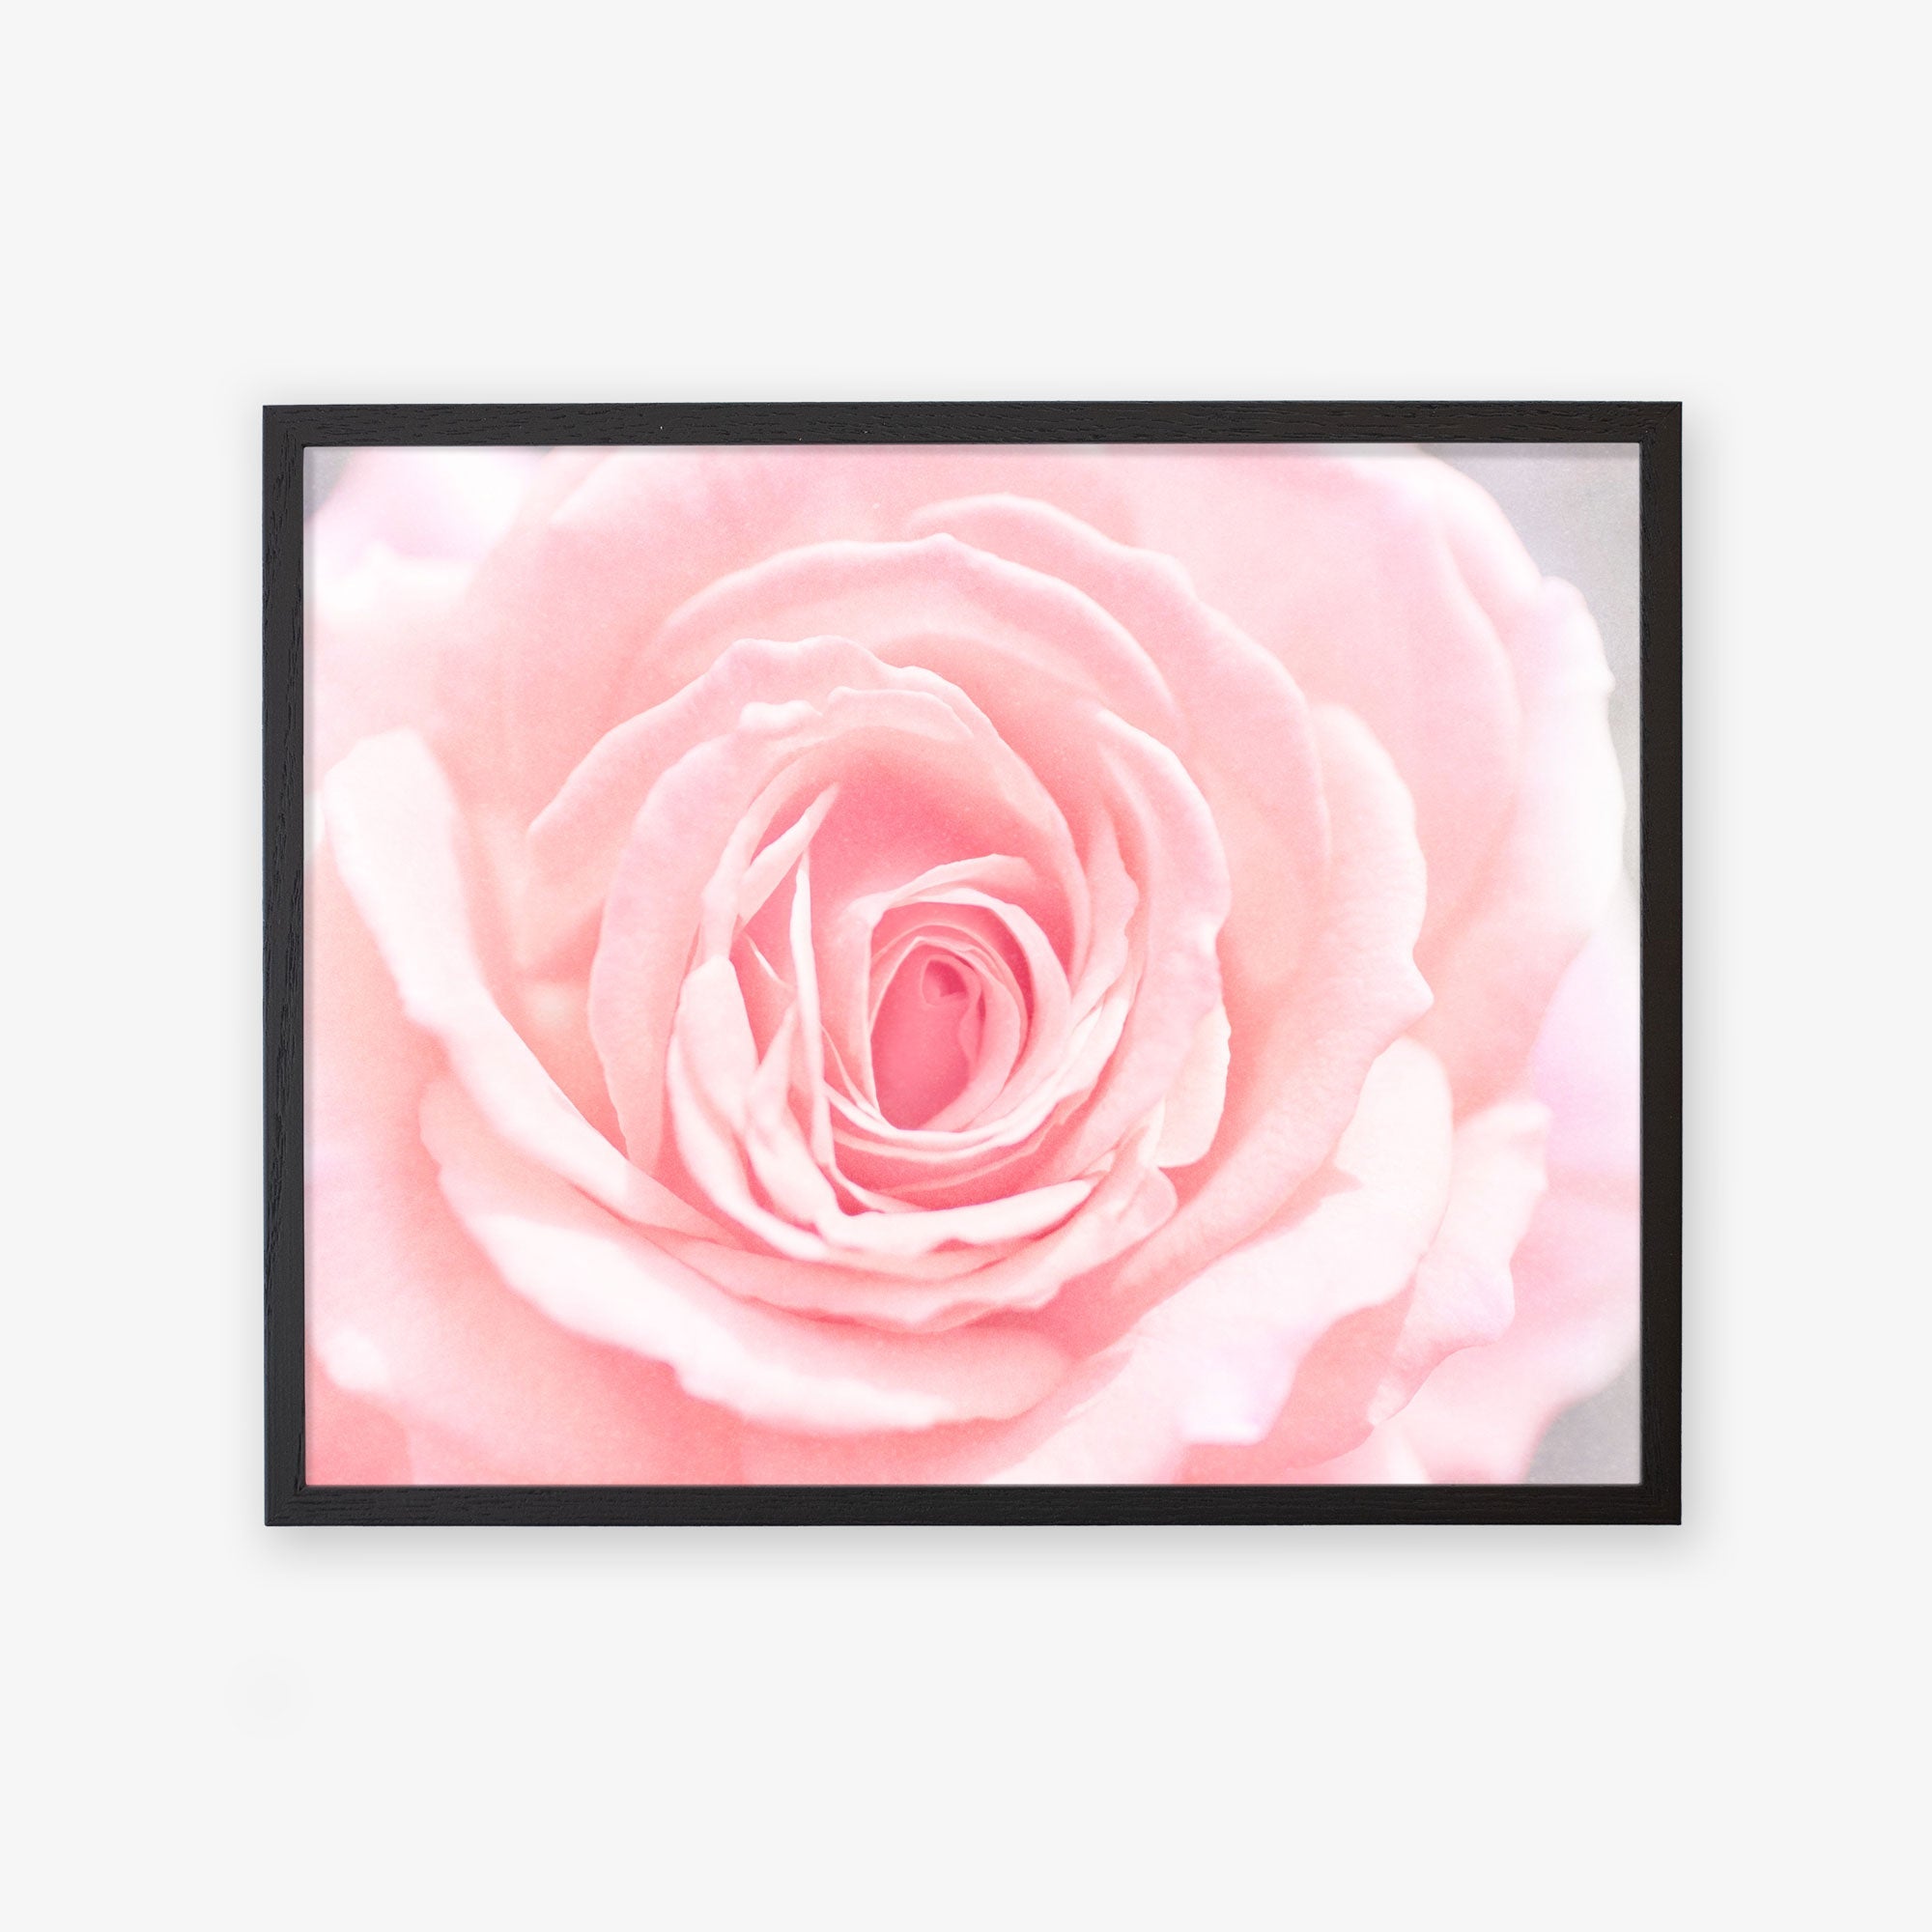 Framed photograph of a Pink Rose Print, &#39;Pink and Shabby&#39; in bloom, highlighting the intricate layers of its petals, displayed against a white background by Offley Green.